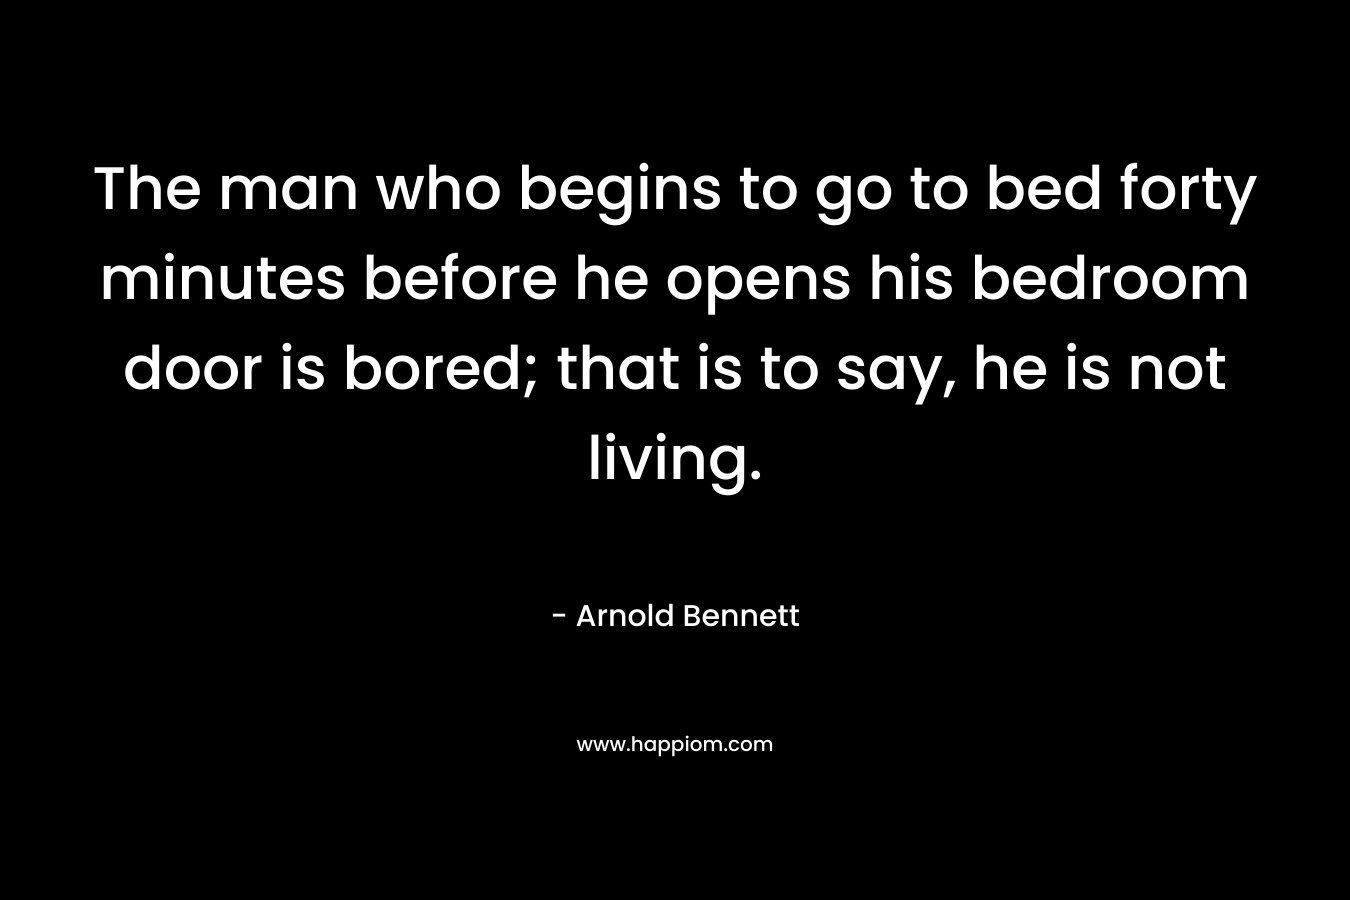 The man who begins to go to bed forty minutes before he opens his bedroom door is bored; that is to say, he is not living. – Arnold Bennett